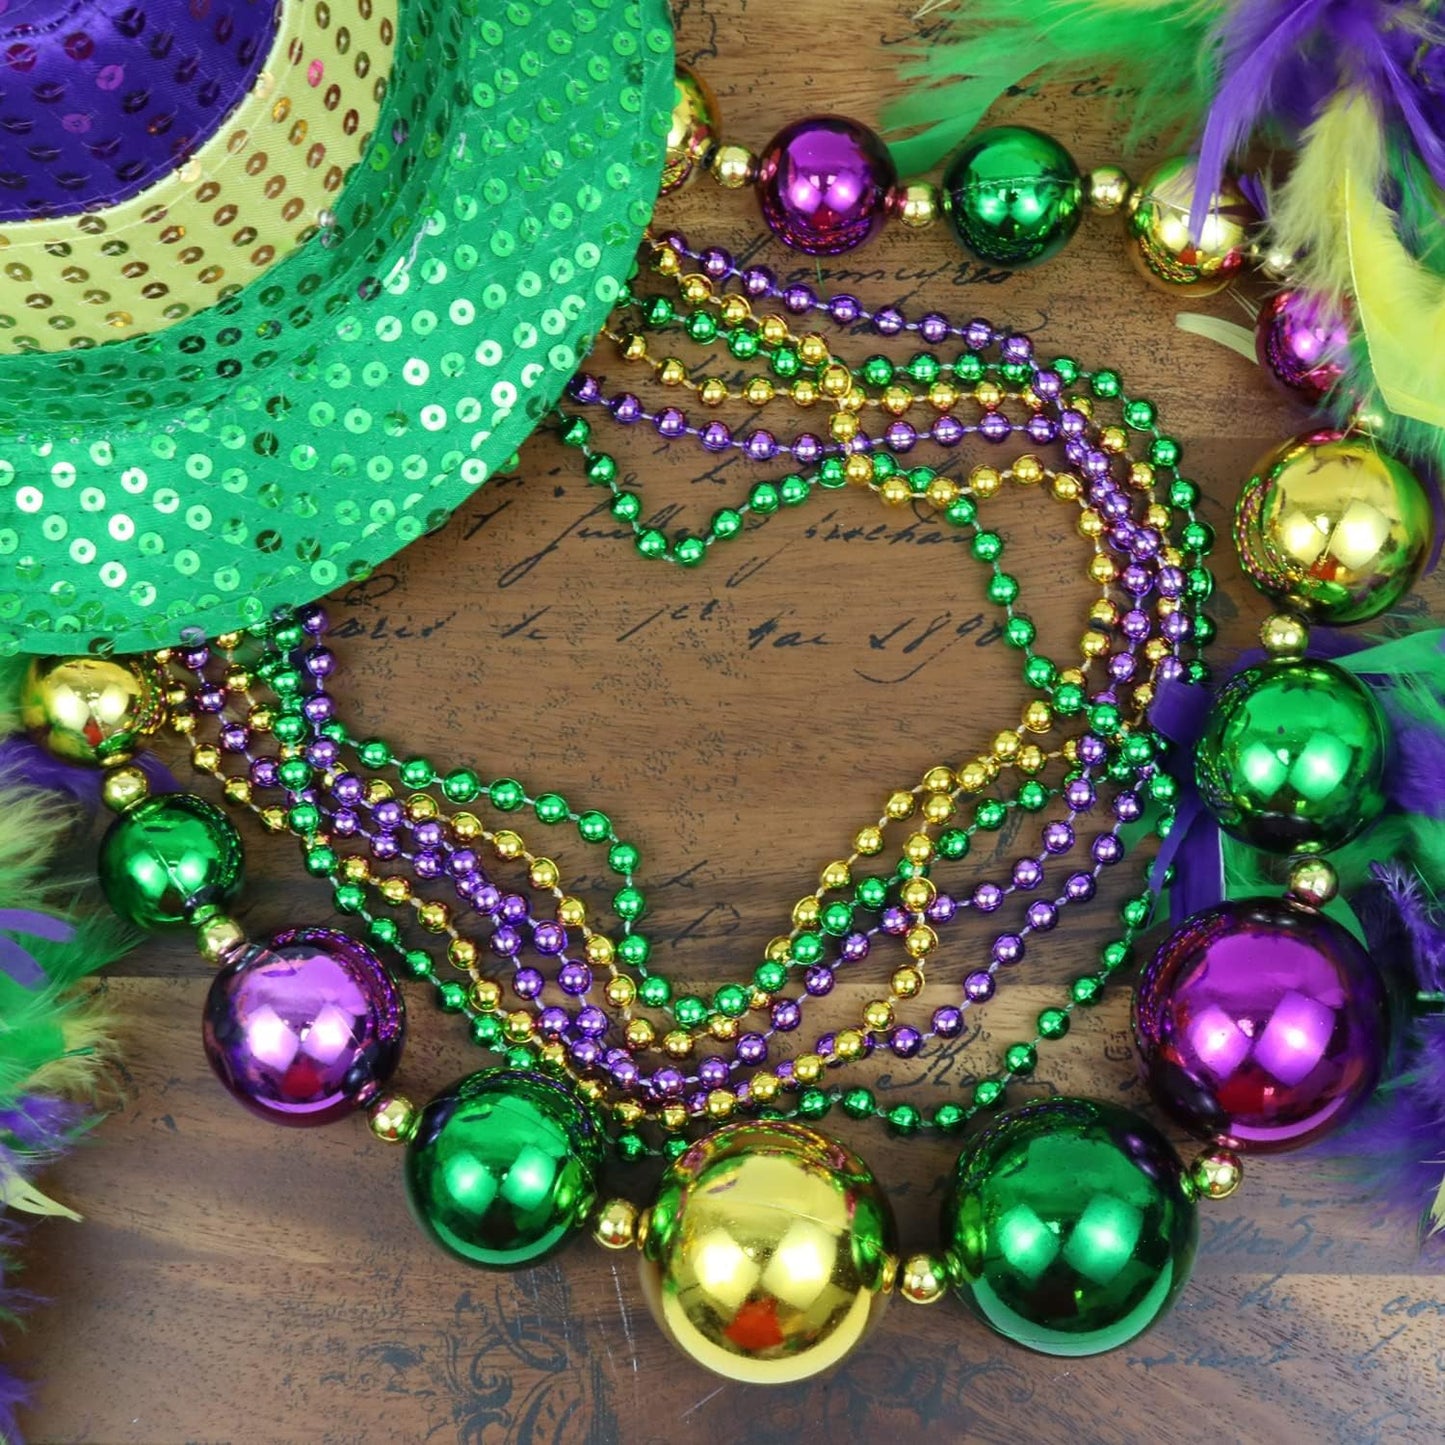 GIFTEXPRESS 6pcs Mardi Gras 46" Jumbo Ball Bead Necklaces and 33” 7mm Assorted Metallic Color Beaded Necklaces